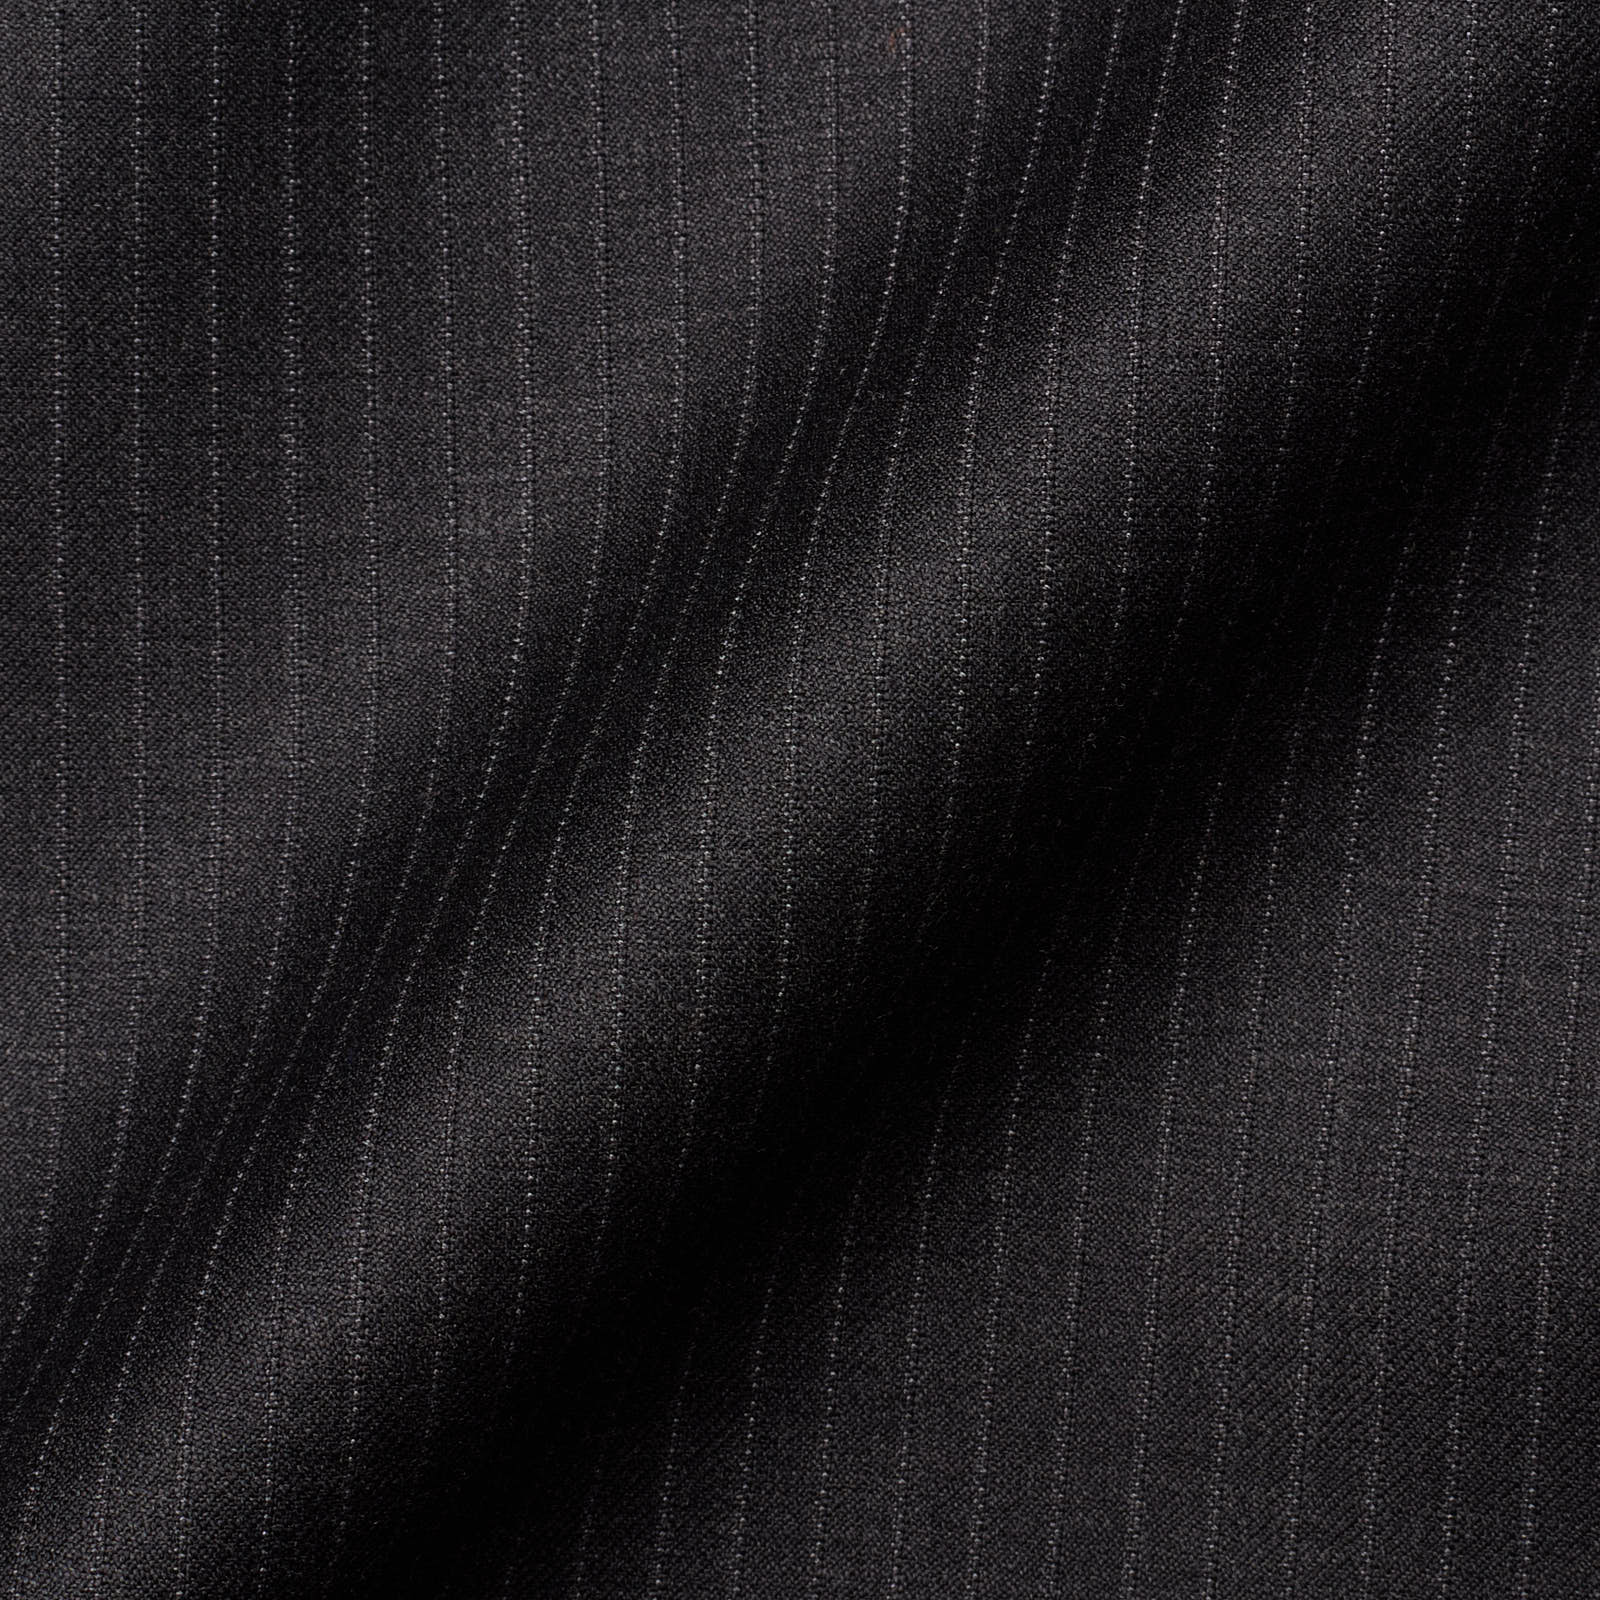 VANNUCCI Milano Charcoal Gray Striped Virgin Wool Suit EU 54 NEW US 44